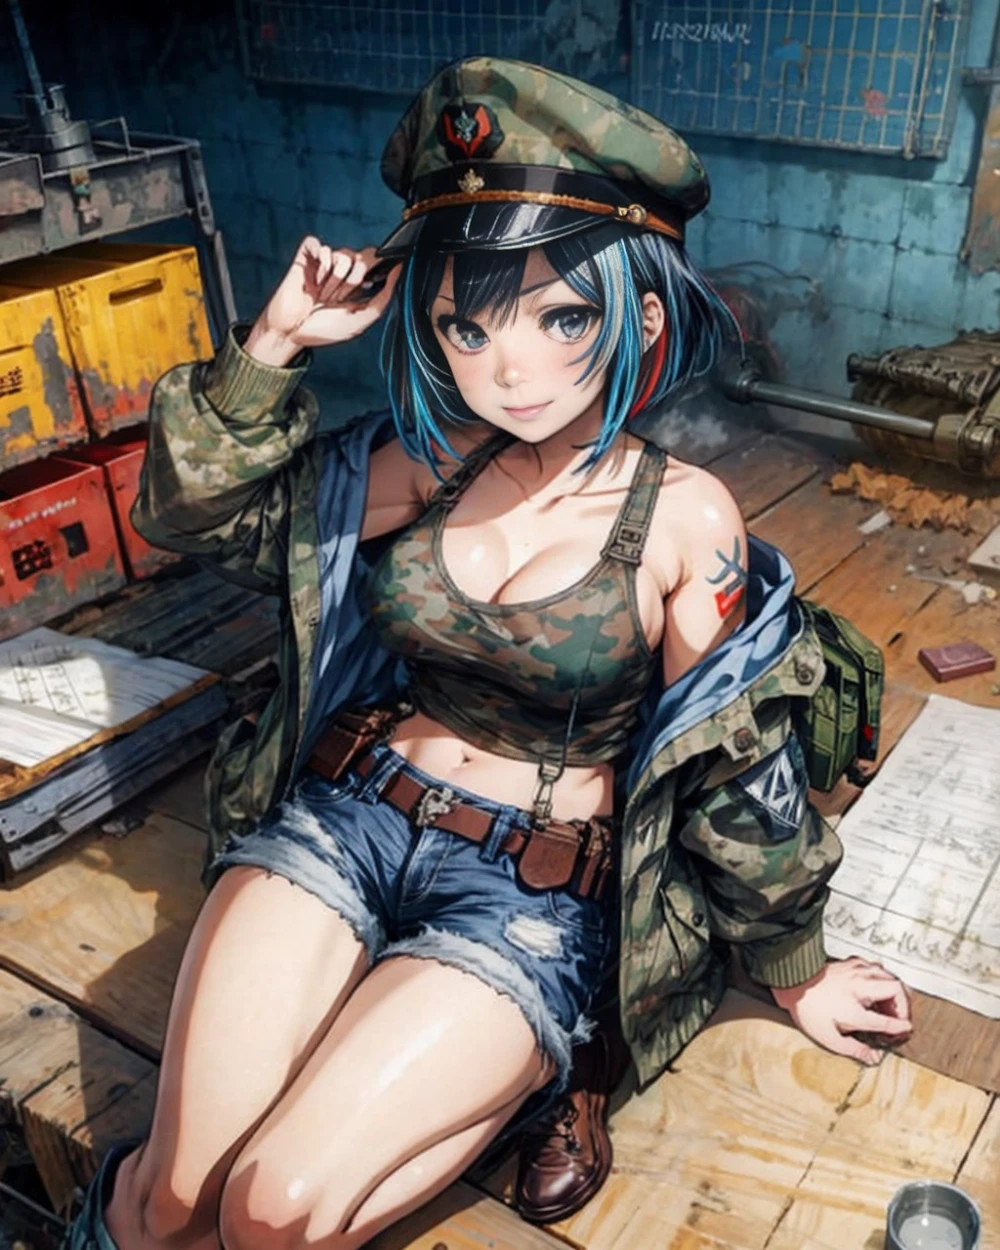 military-uniform-anime-style-all-ages-40